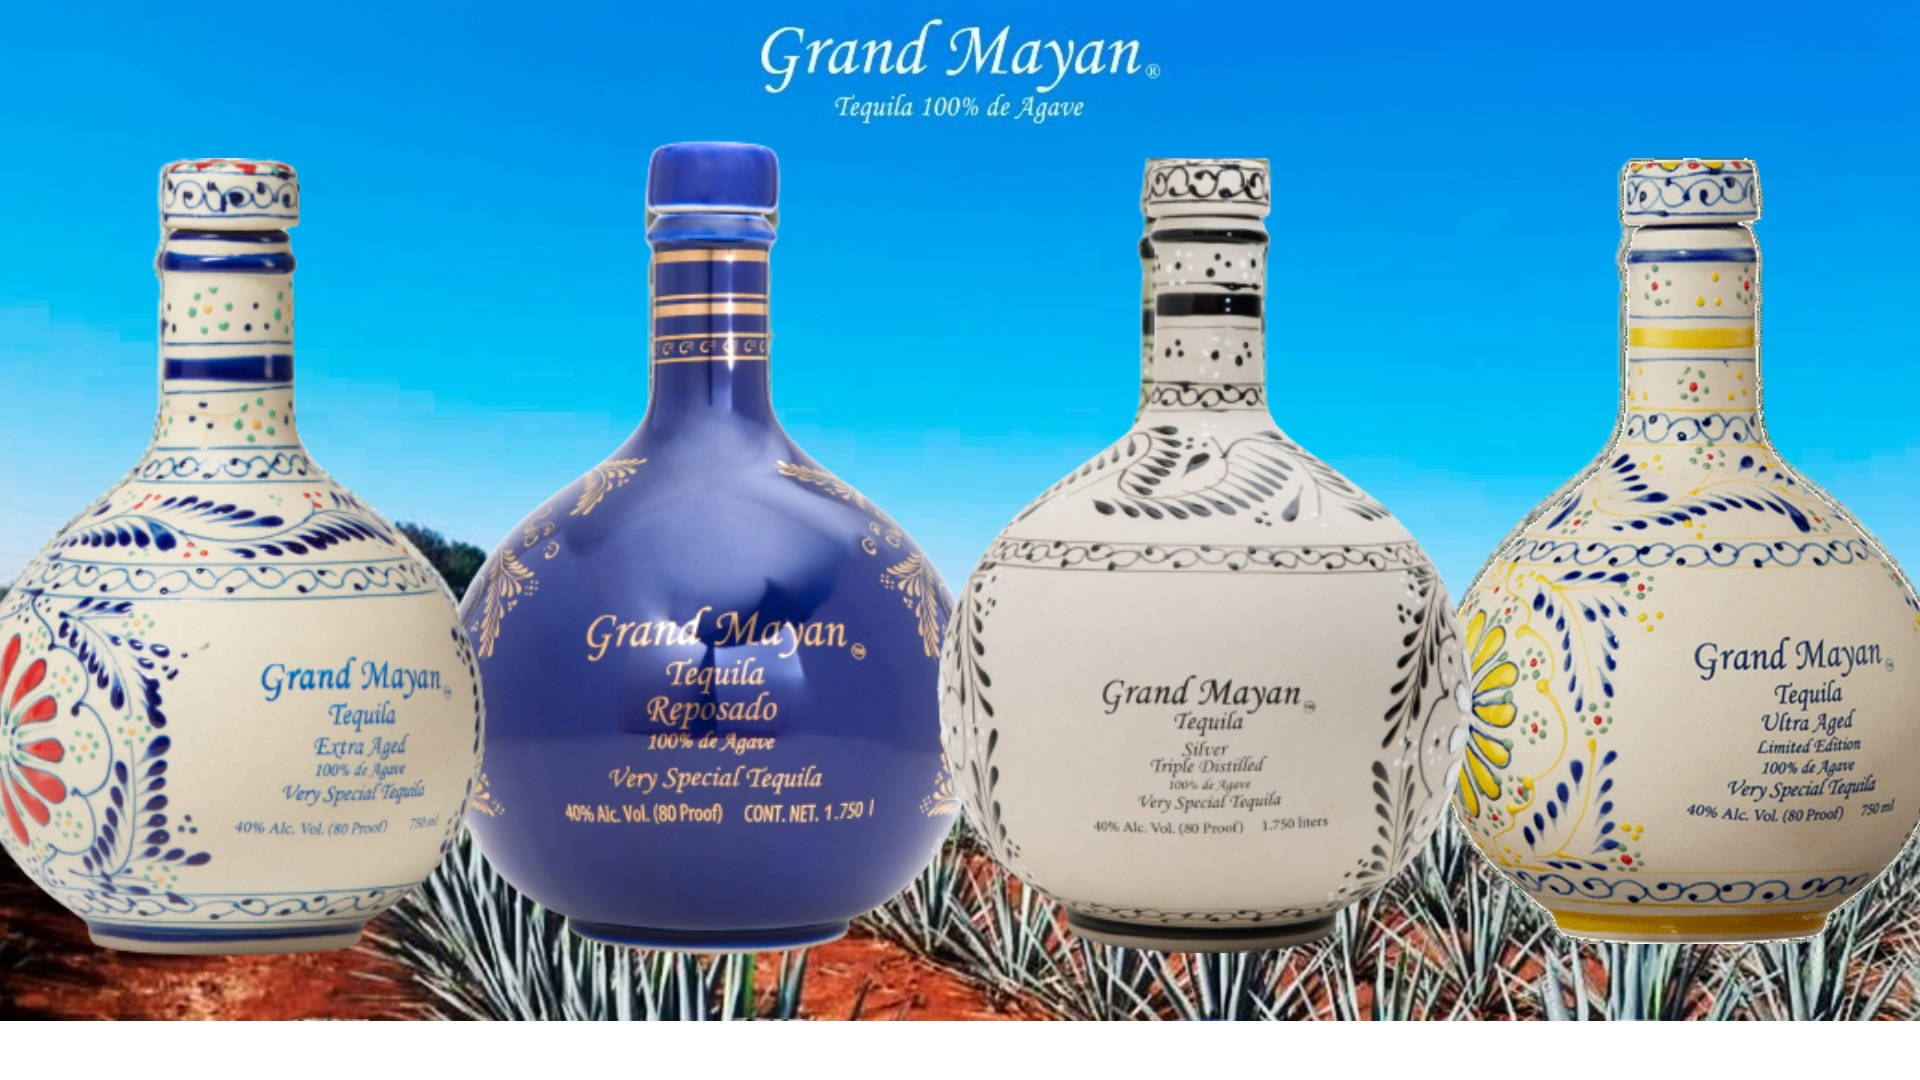 Grand Mayan Tequila Bottles Edited Photo Picture